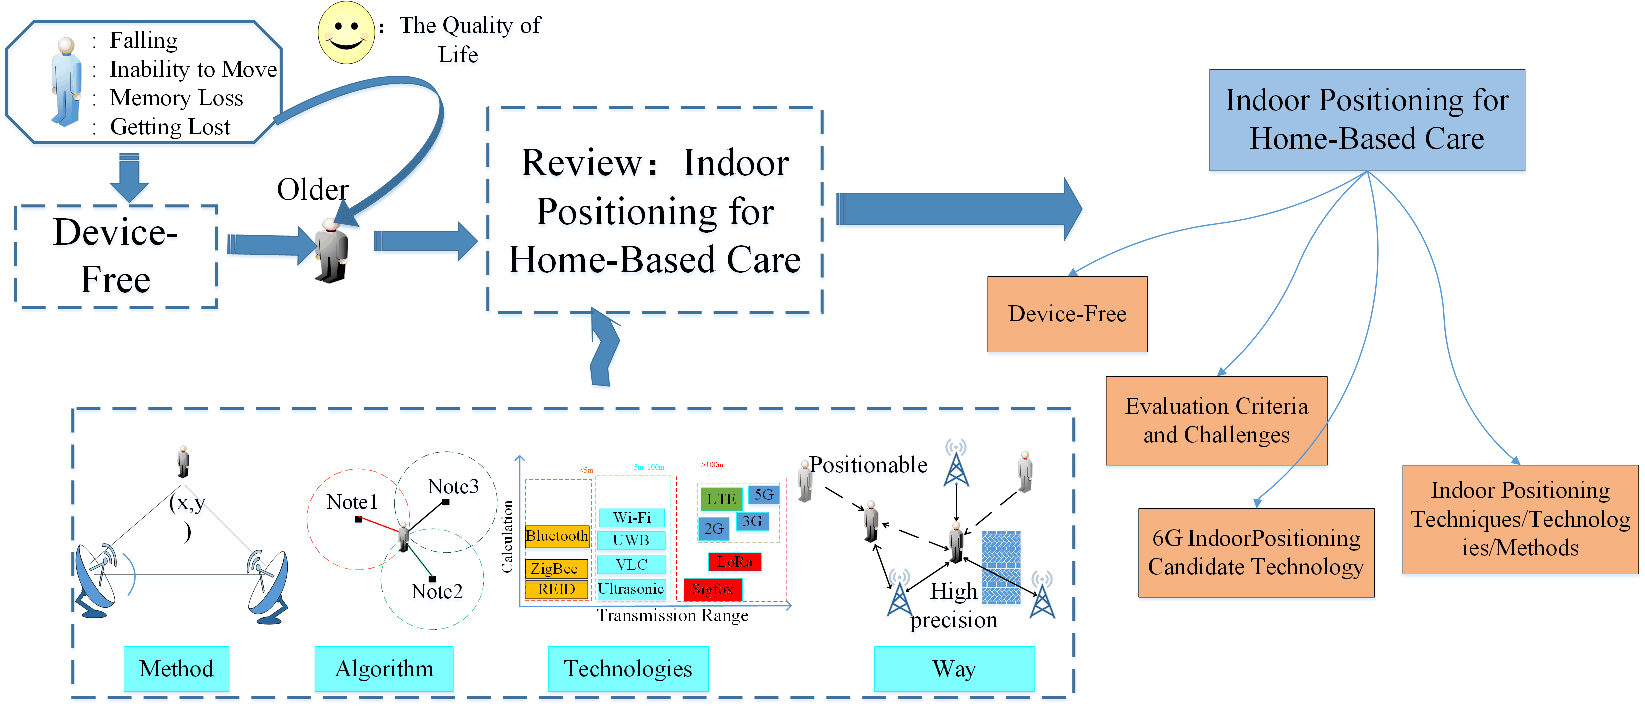 A Review of Device-Free Indoor Positioning for Home-Based Care of the Aged: Techniques and Technologies